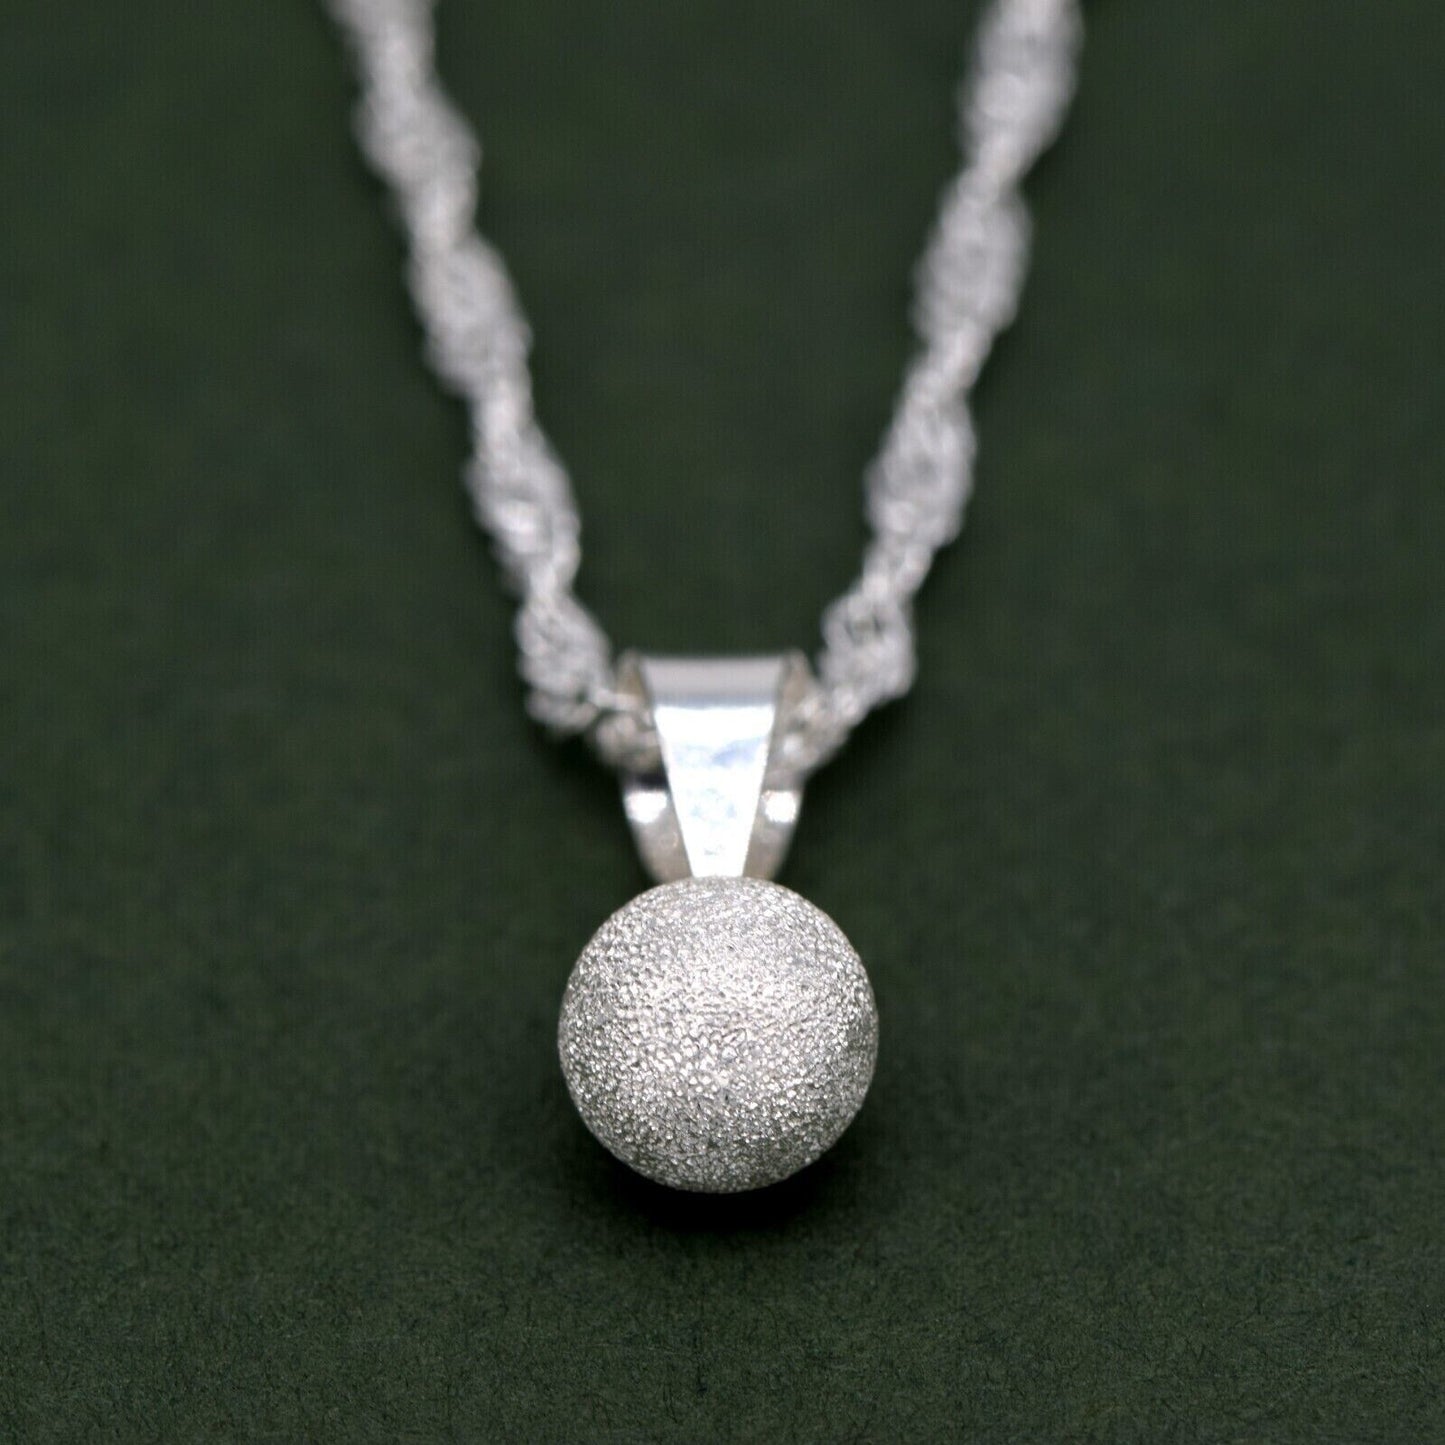 Genuine 925 Sterling Silver 7mm Frosted Ball Pendant Necklace on Singapore Chain